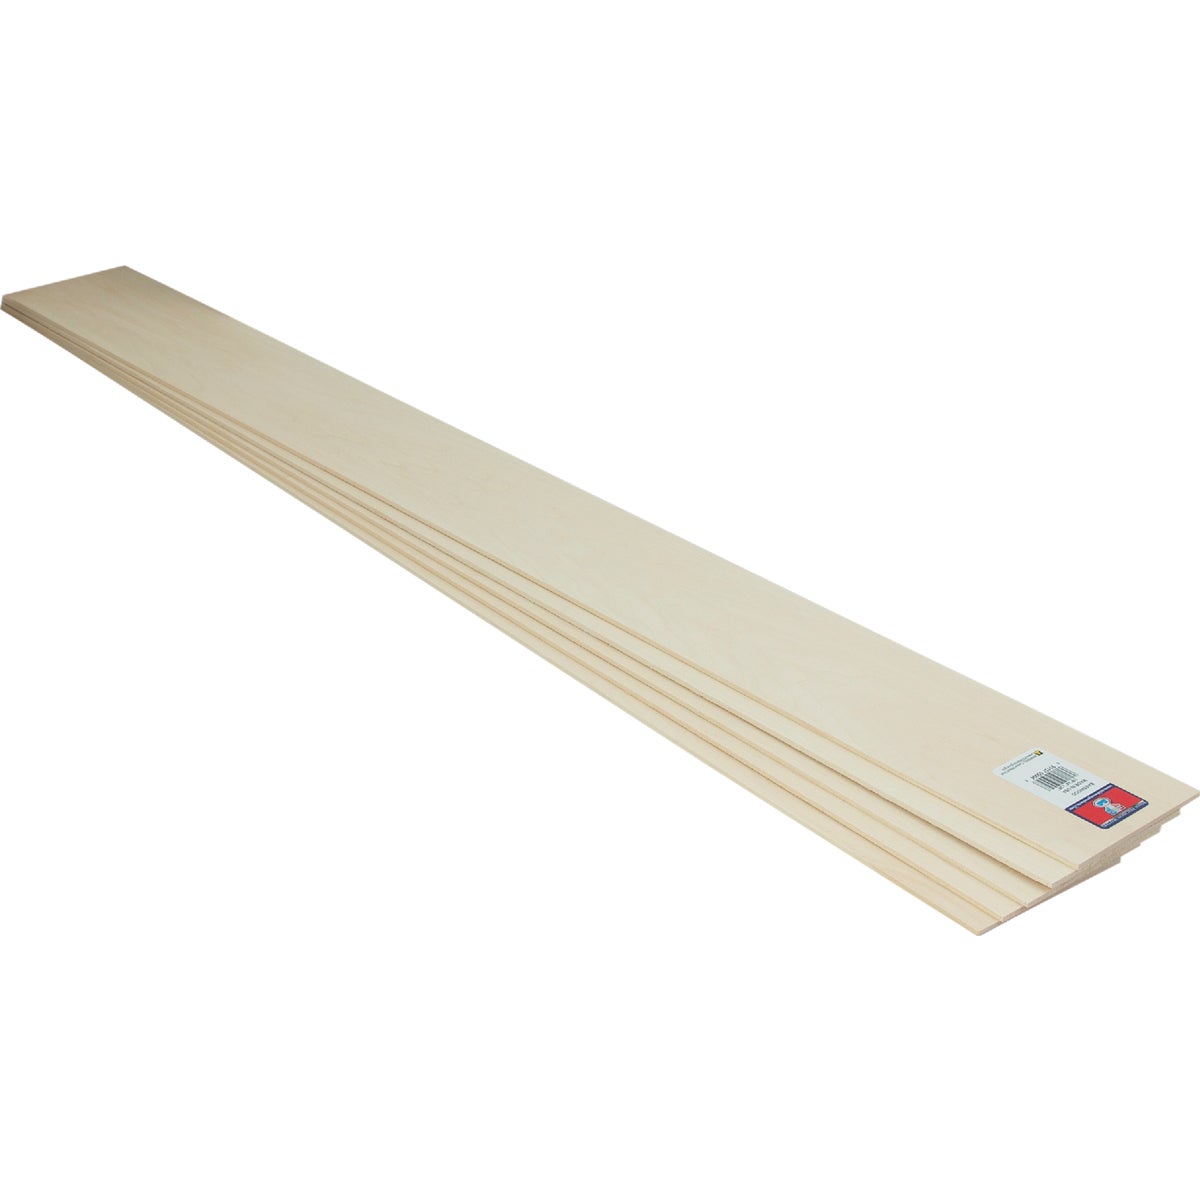 Midwest Products 1/8 In. x 3 In. x 3 Ft. Basswood Board